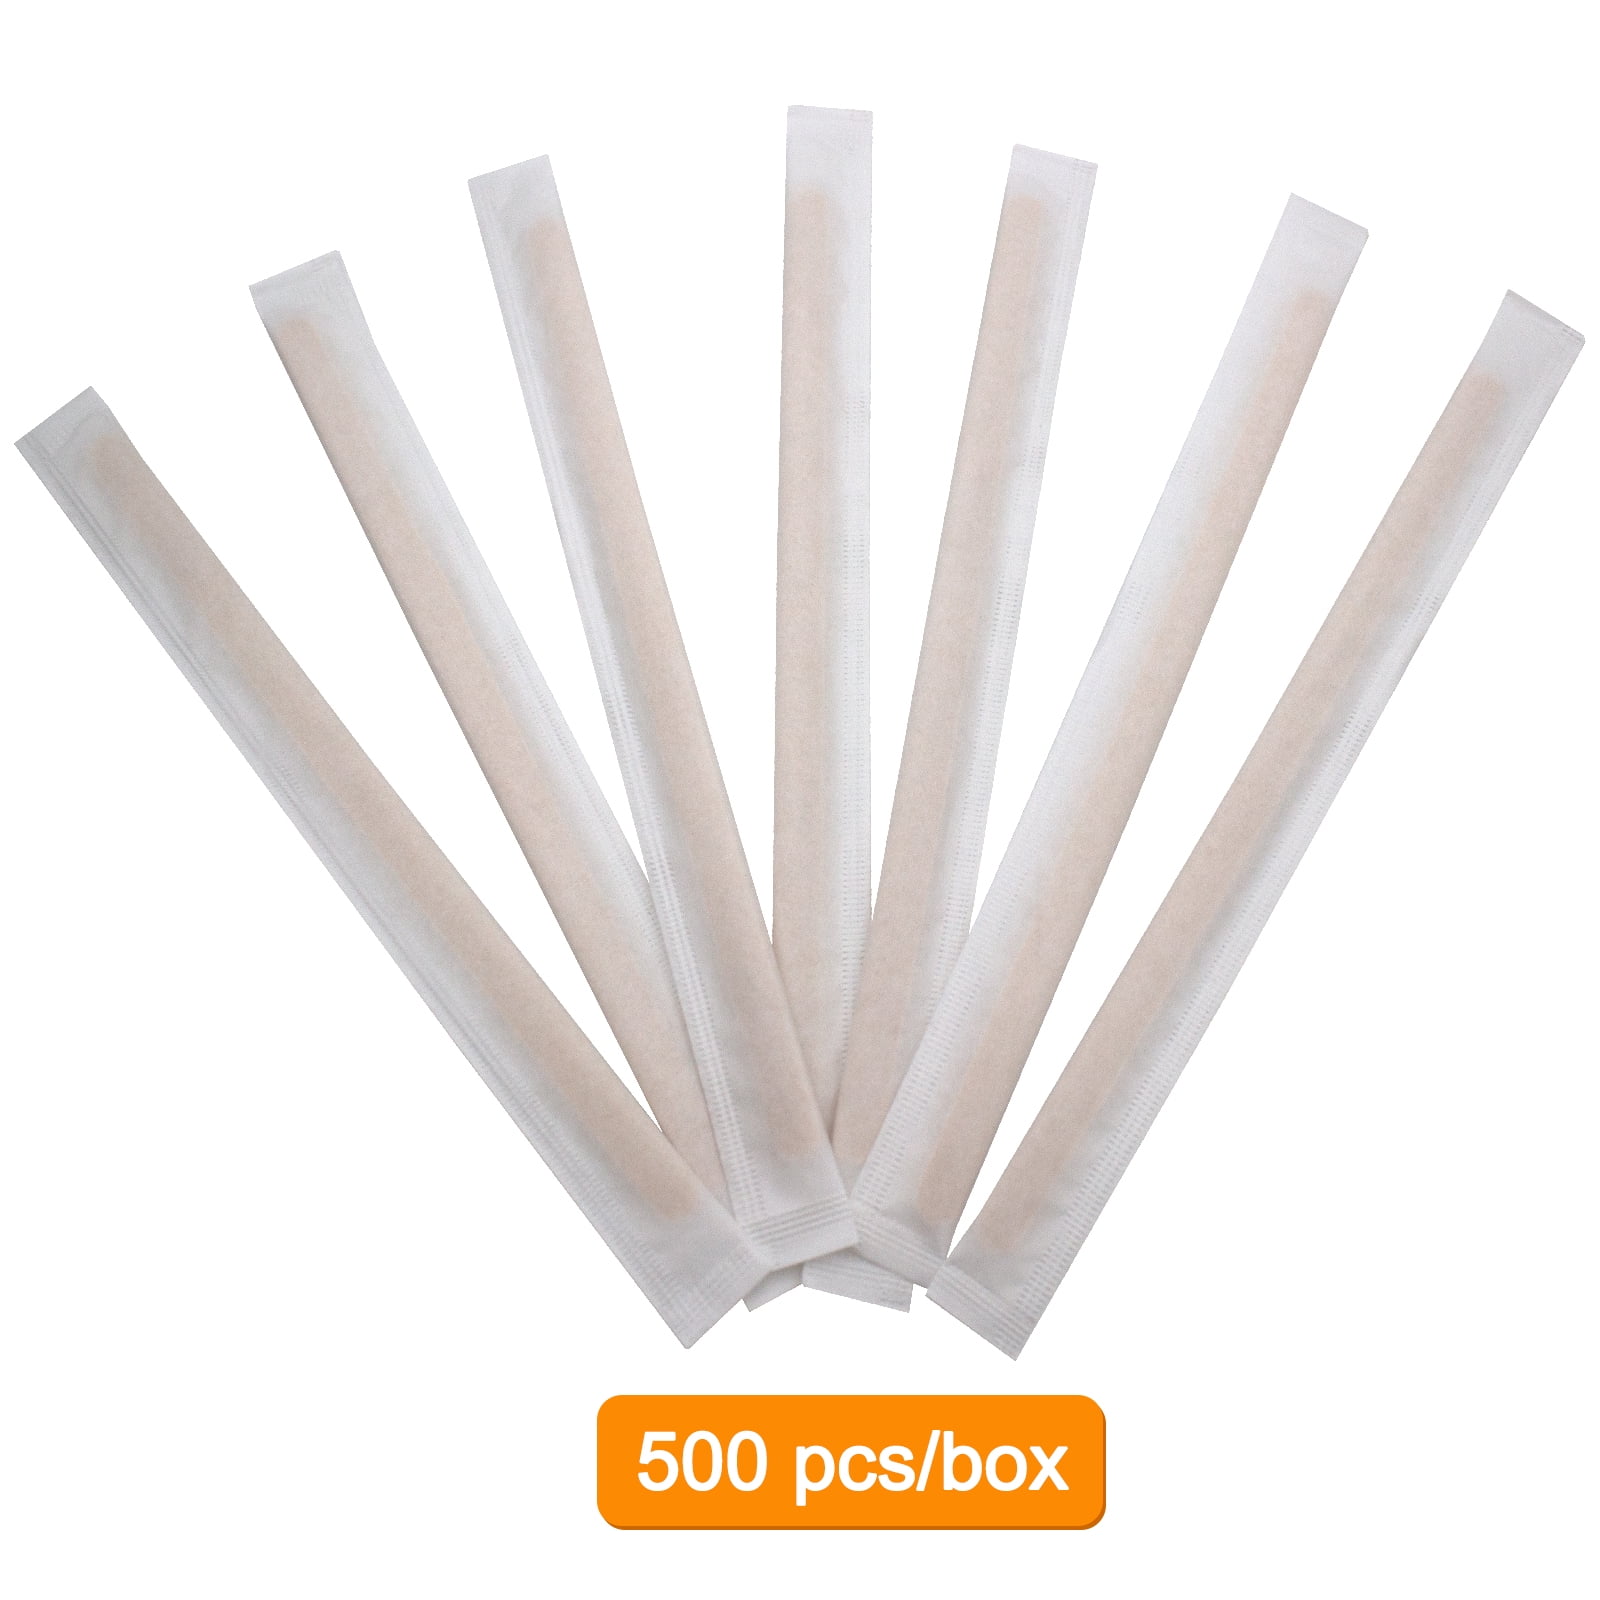 Disposable Wooden Starbucks Coffee Cups Stir Sticks Tea Stirrers Wood  Starbucks Coffee Cups Stirrers Disposable Starbucks Coffee Cups Stirrer For  Hot Cold Drink From Yf20150307, $0.03